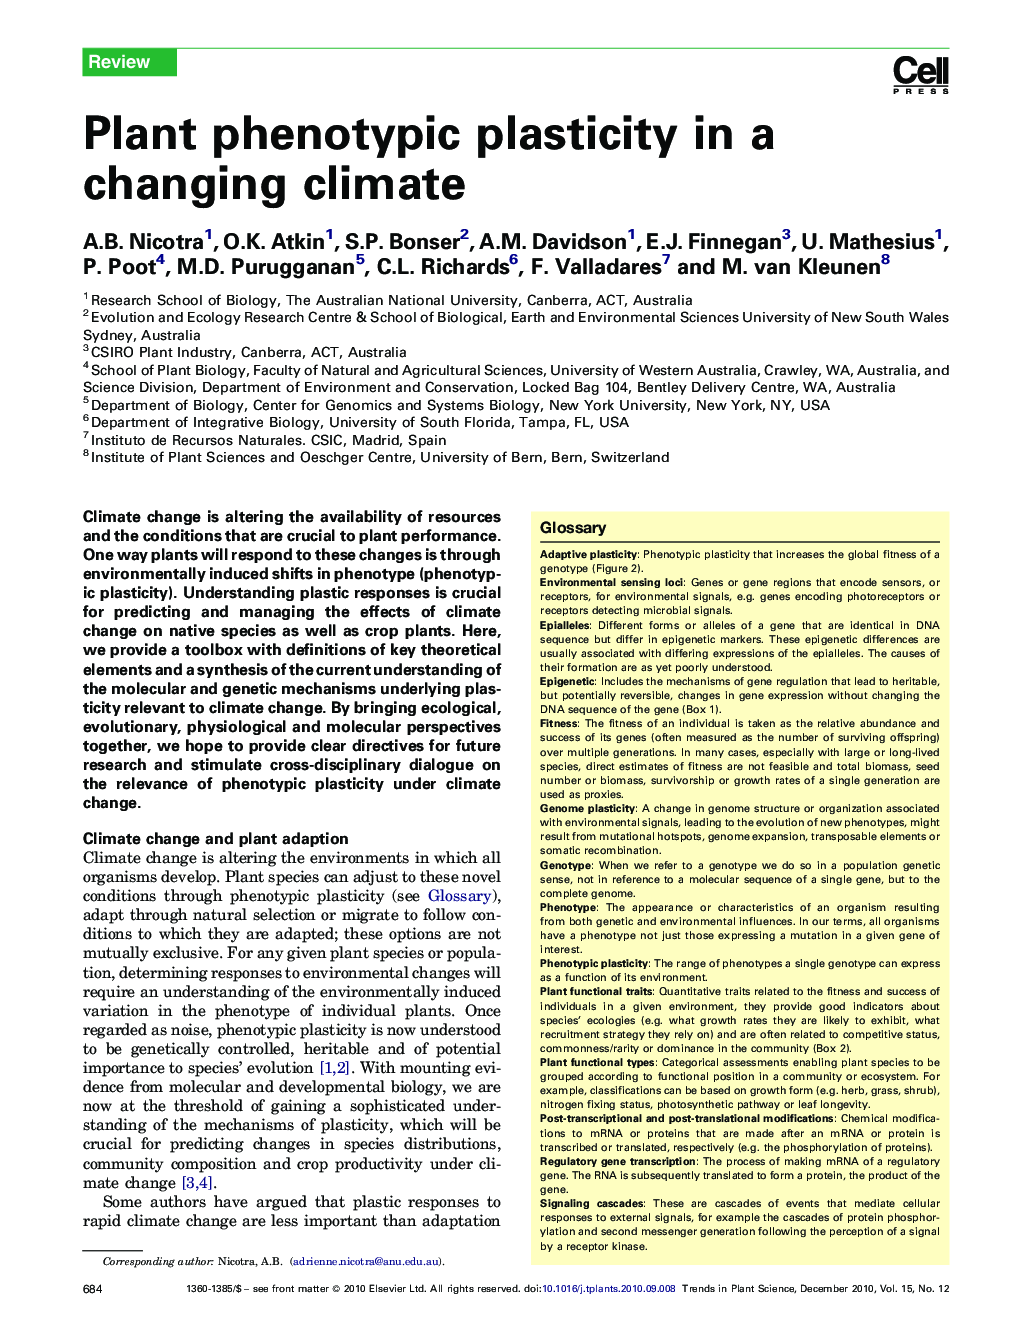 Plant phenotypic plasticity in a changing climate